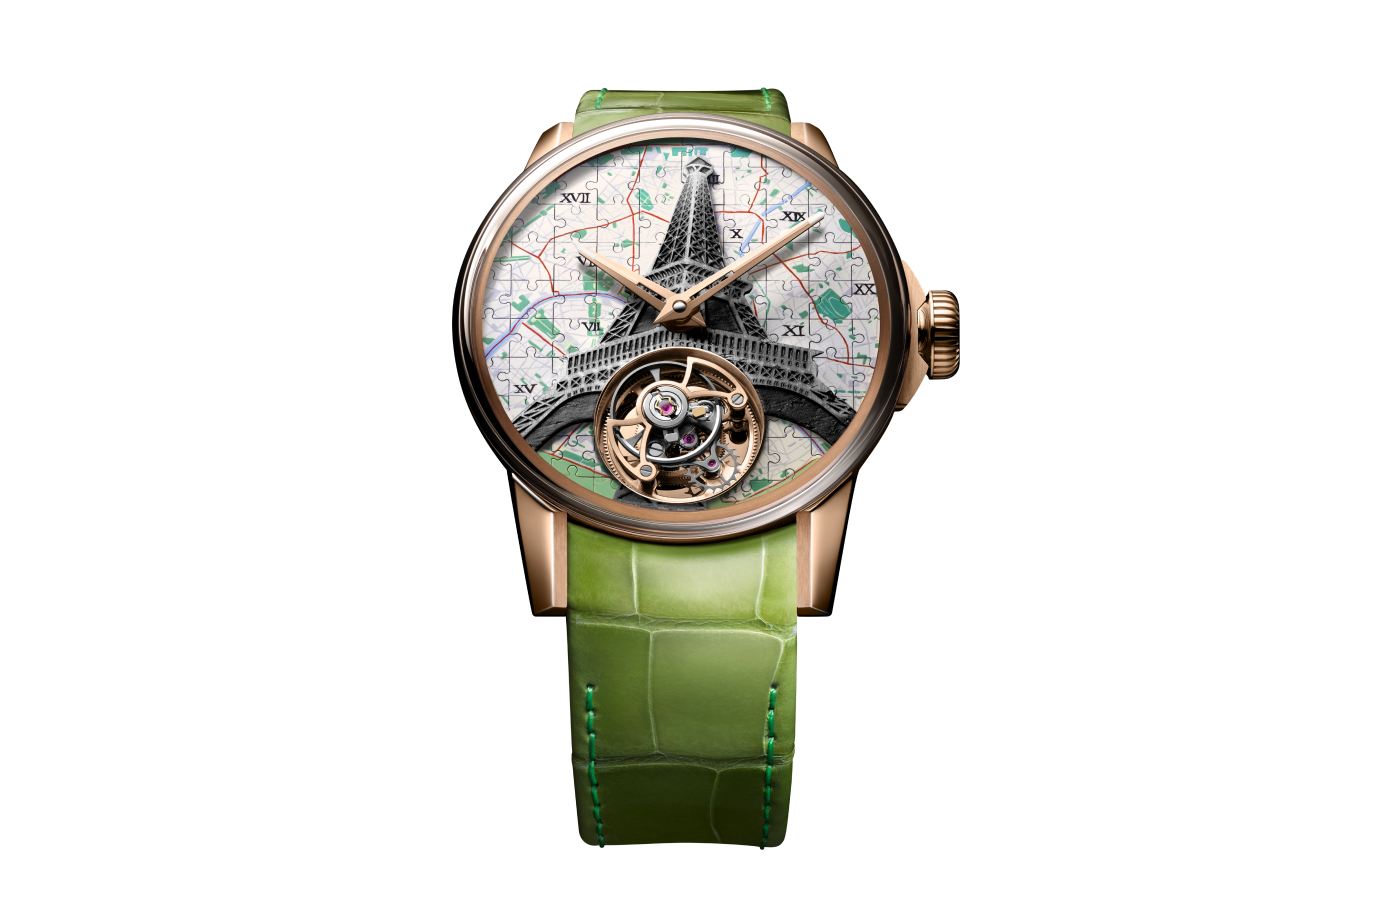 Louis Moinet Around the World Paris watch dial made from 81 interlocking pieces reproducing the map of Paris and a hand carved Eiffel Tower made from a fragment of an original beam